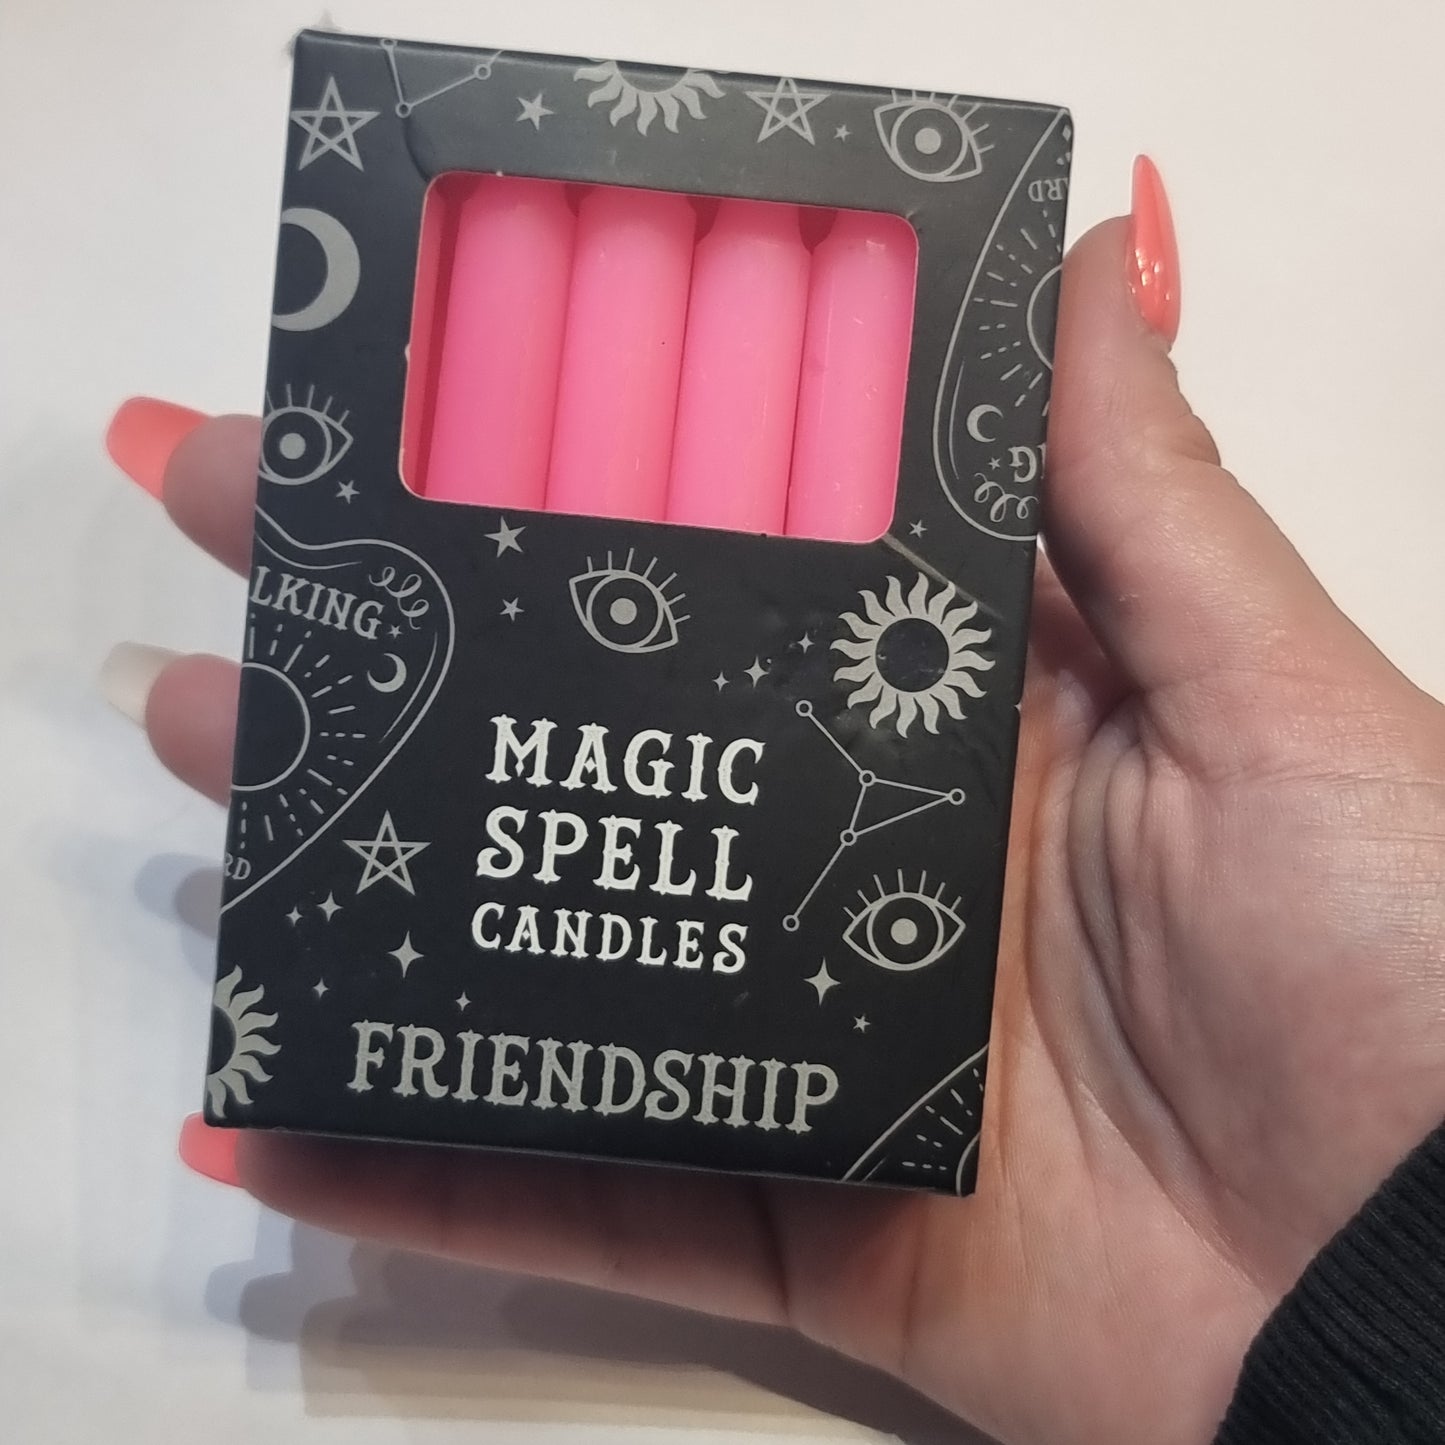 Spell candles - friendship - Rivendell Shop